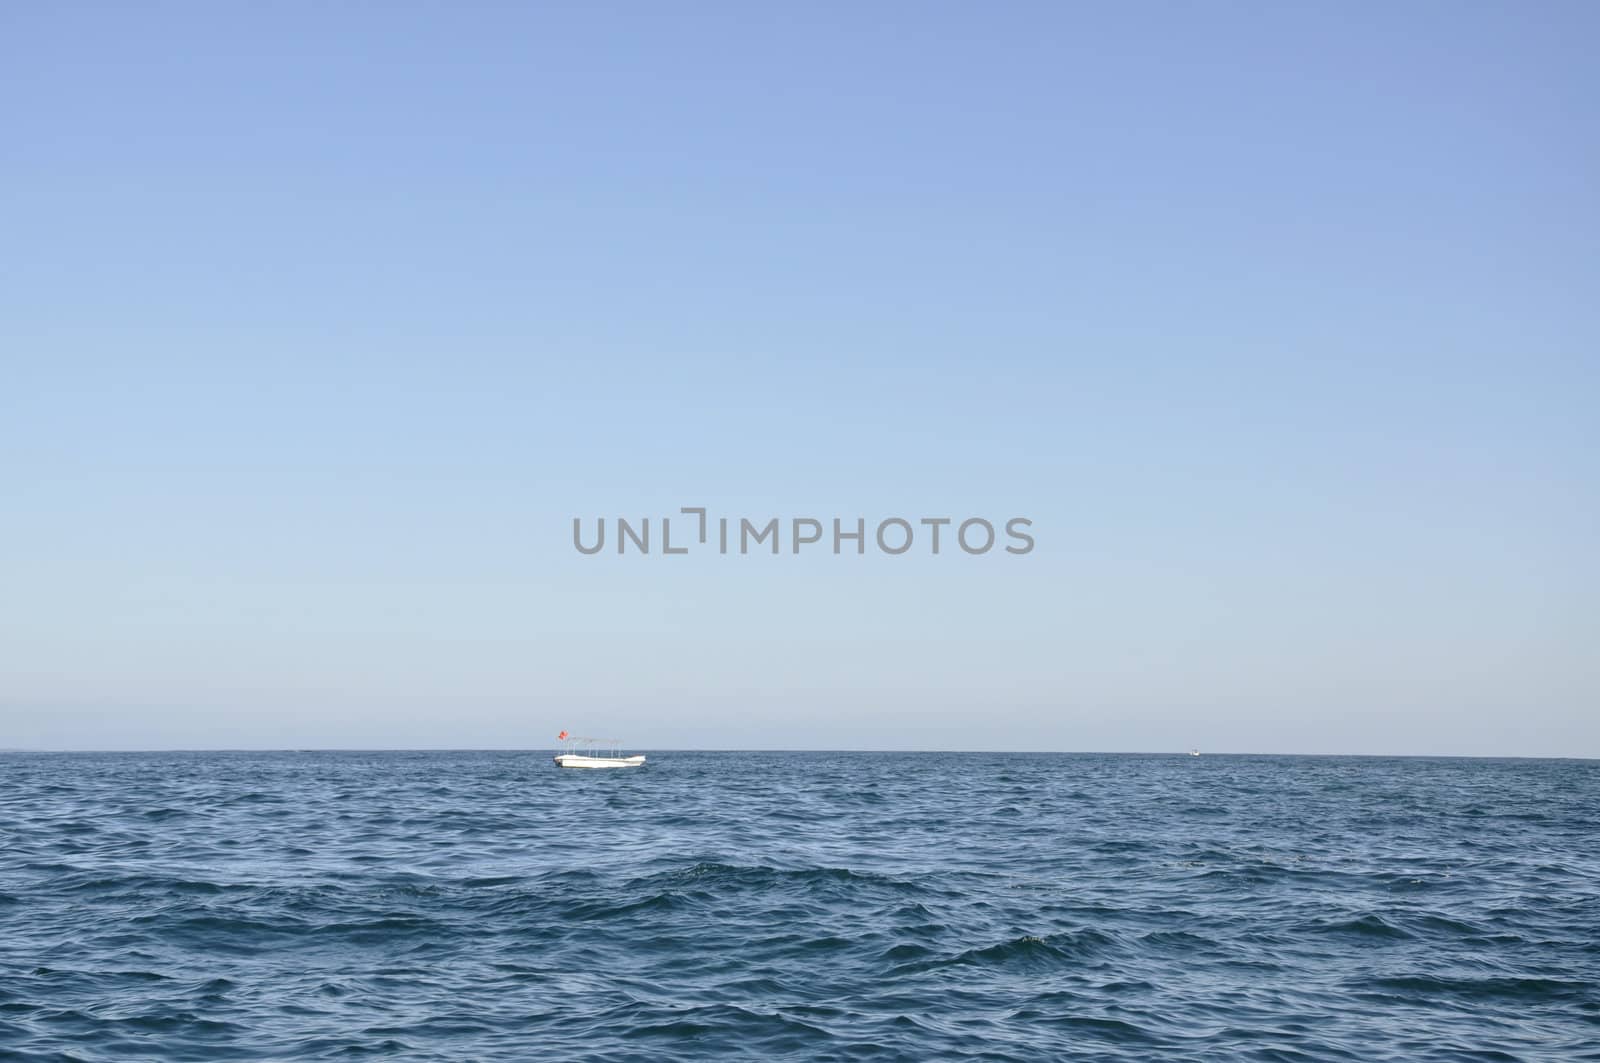 A boat sailing in the clear blue waters of the Indian Ocean on a bright sunny day